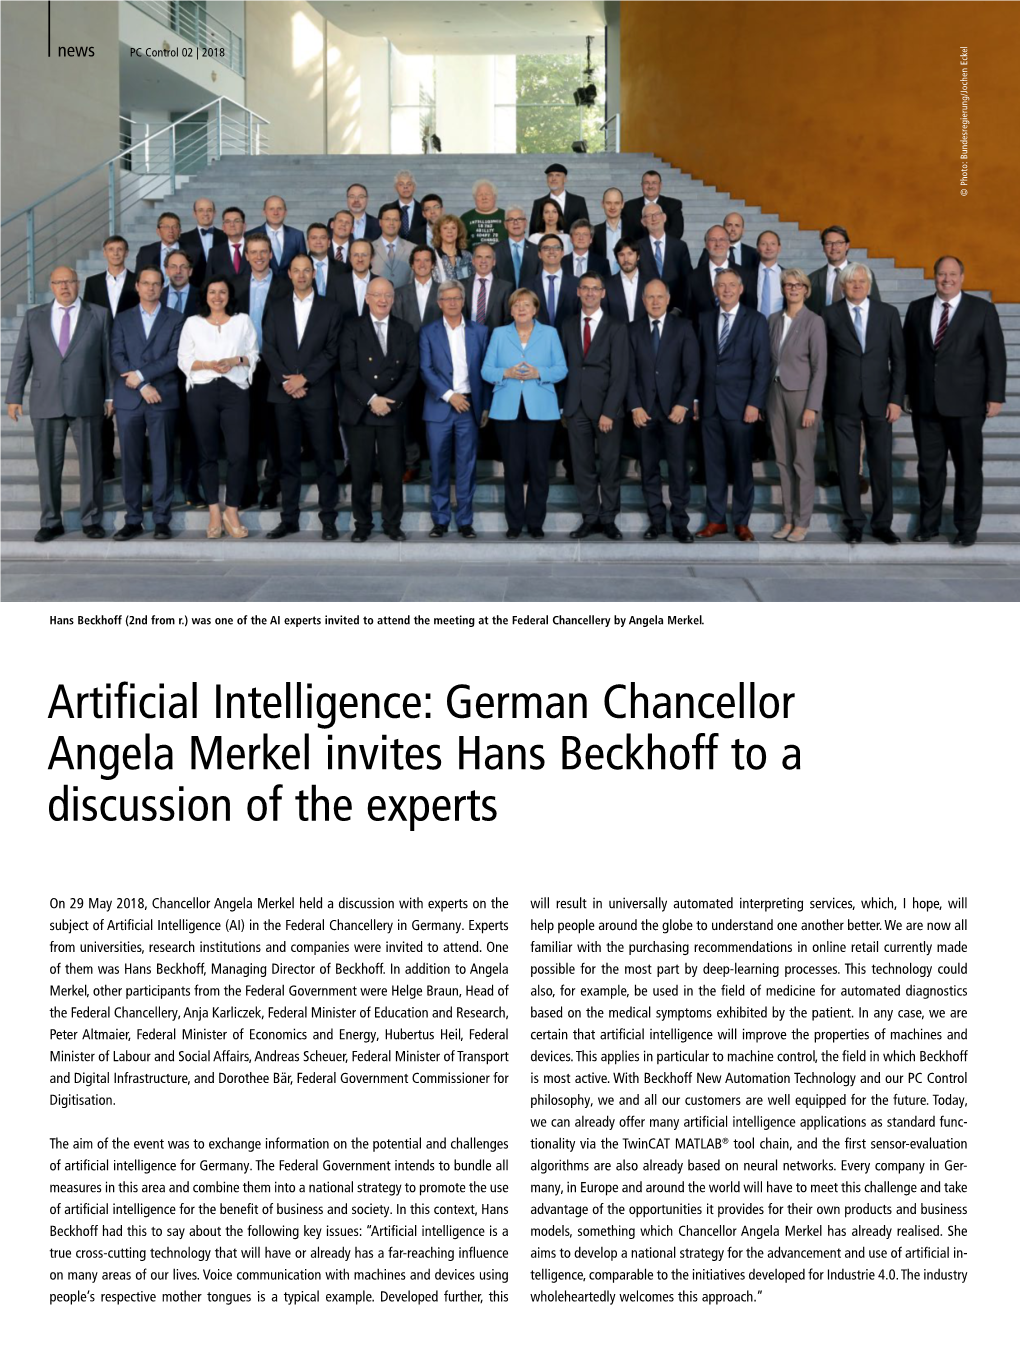 Artificial Intelligence: German Chancellor Angela Merkel Invites Hans Beckhoff to a Discussion of the Experts